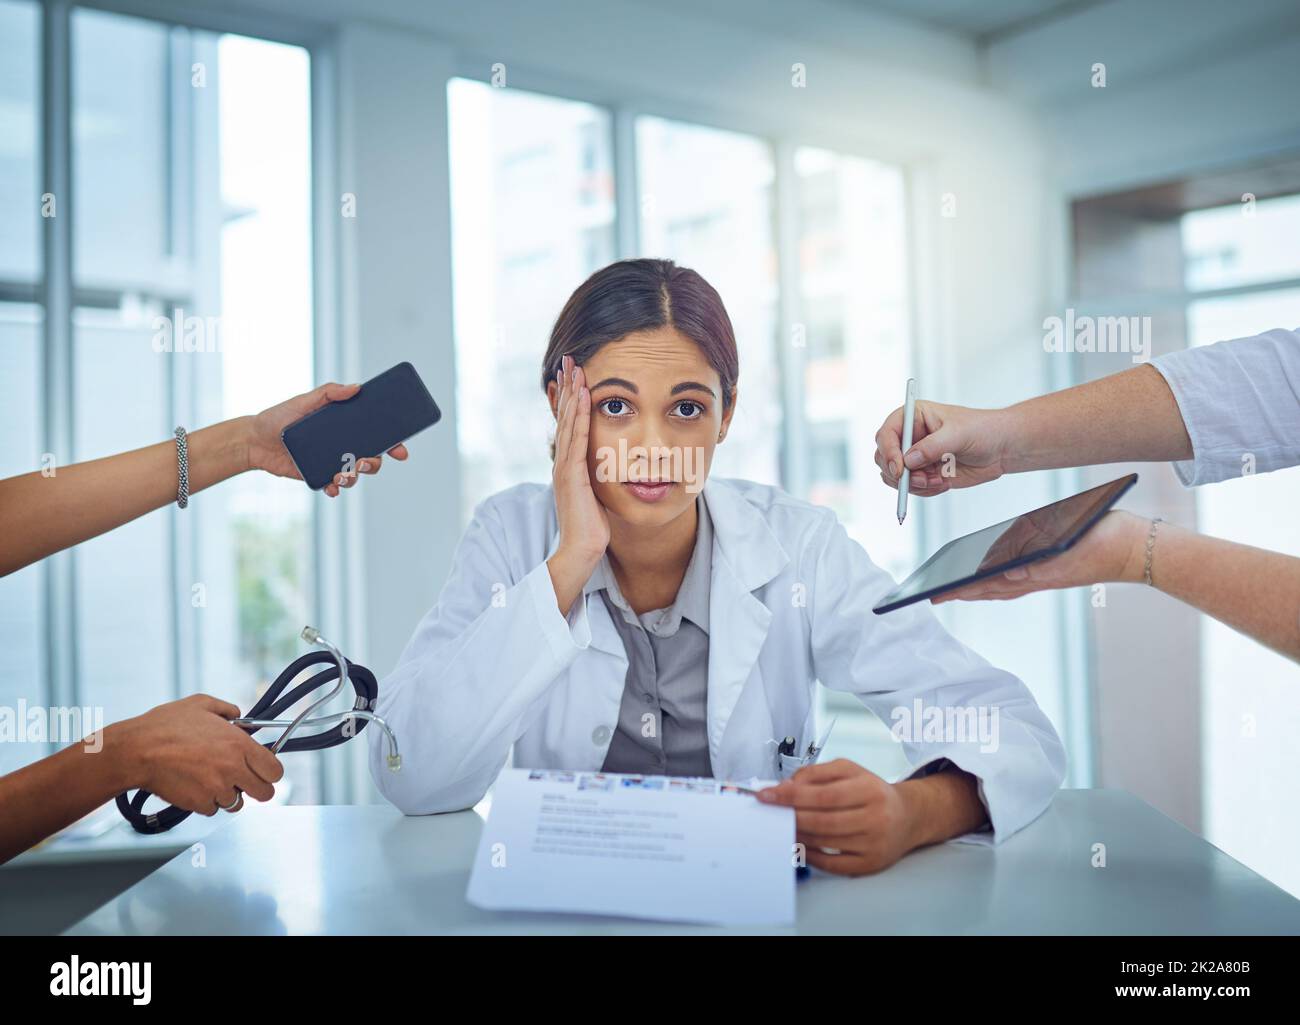 Its too chaotic to cope. Portrait of a young female doctor looking stressed out in a demanding work environment. Stock Photo